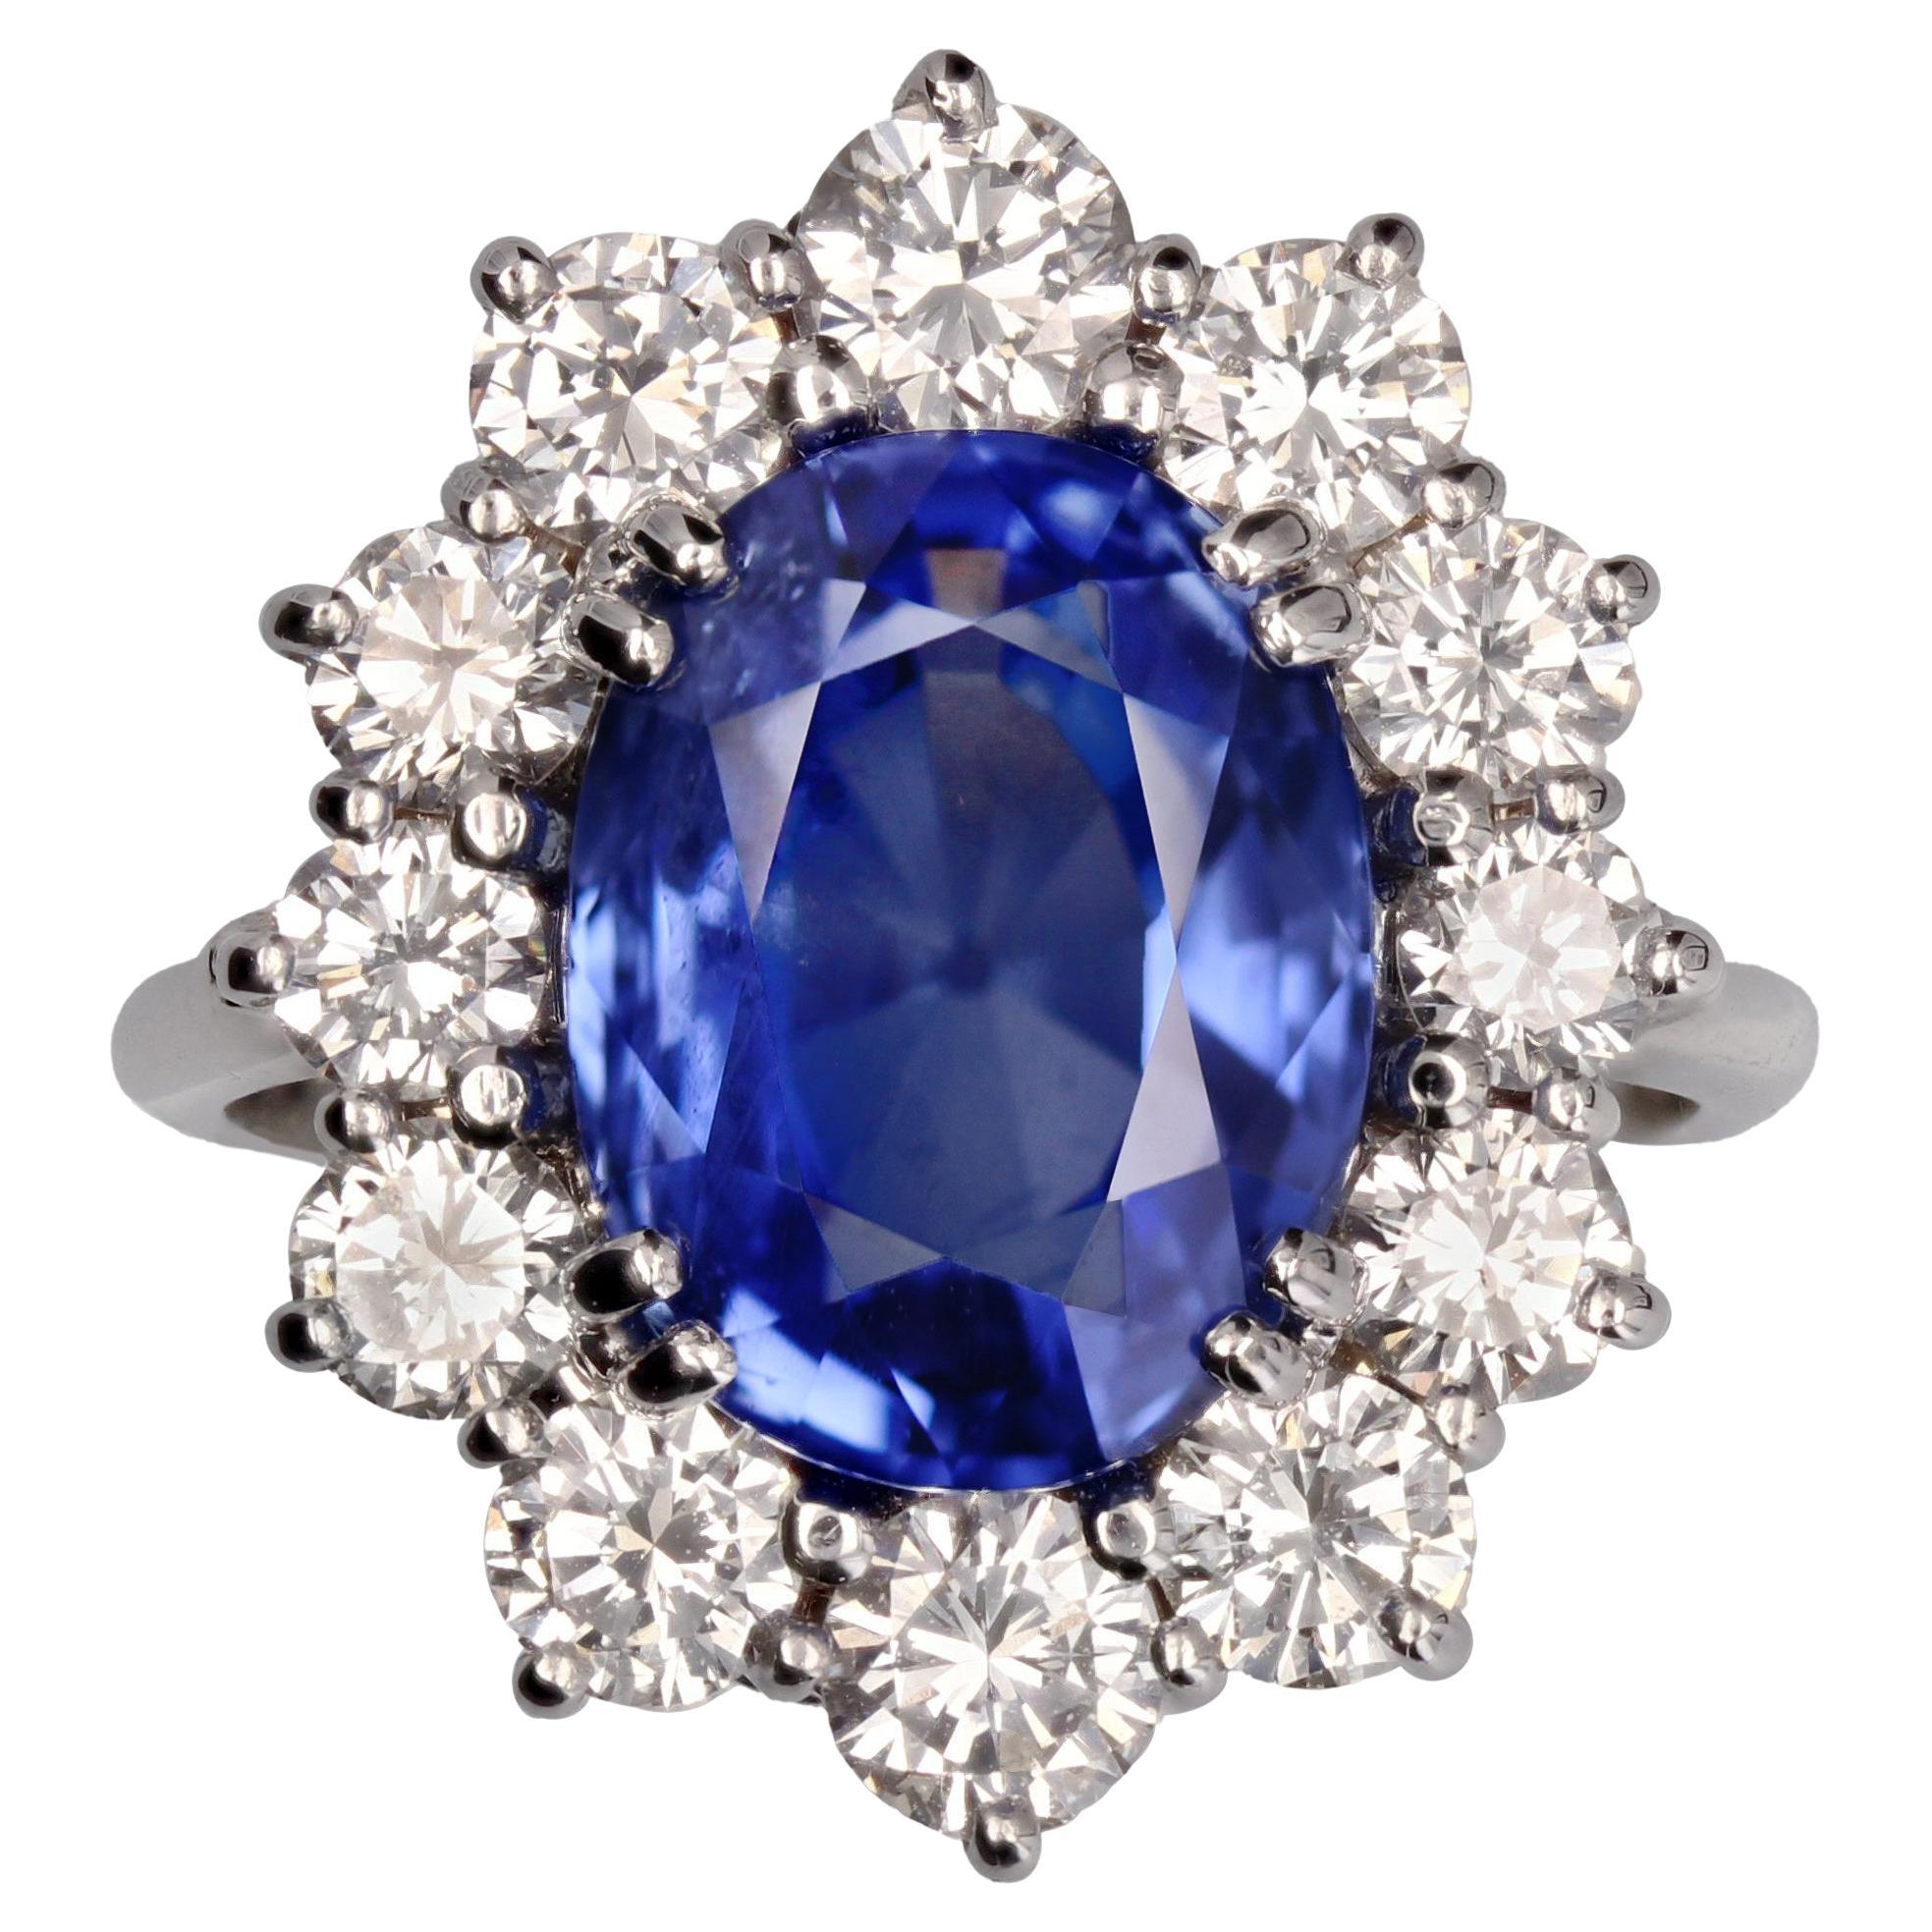 French 1960s No Heat 7.42 Carat Ceylon Sapphire Diamond White Gold Cluster Ring For Sale